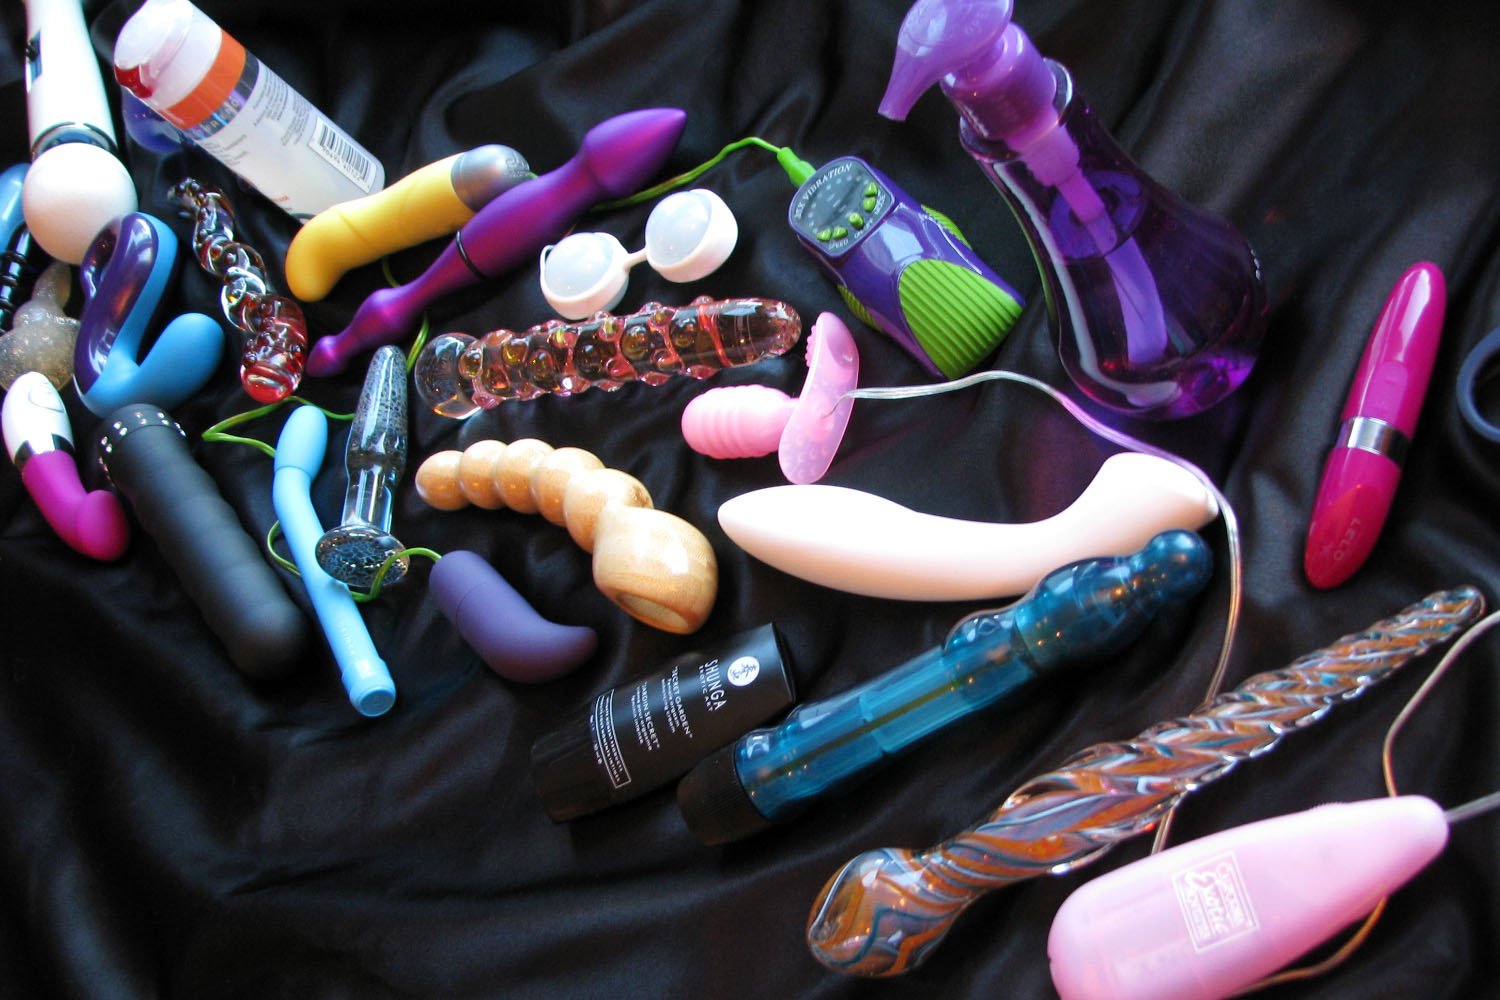 Outtake from my header image photoshoot. Sex toys all over my Throw.